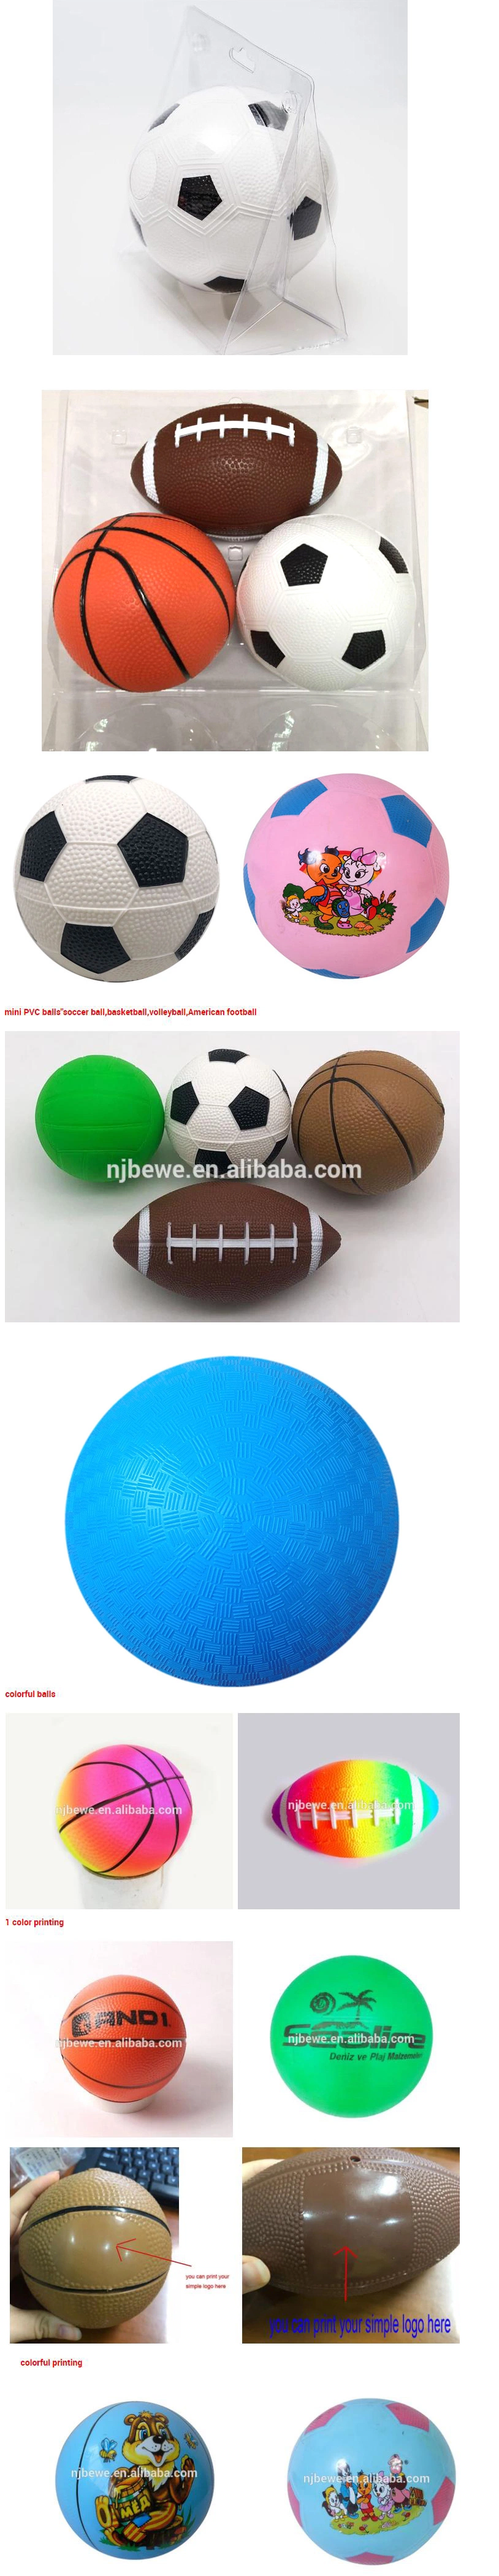 BSCI Audit Blank or 1 Color Logo or Colorful Logo Printed Different Sizes Eco-Friendly Kids Toys Mini Soccer Ball